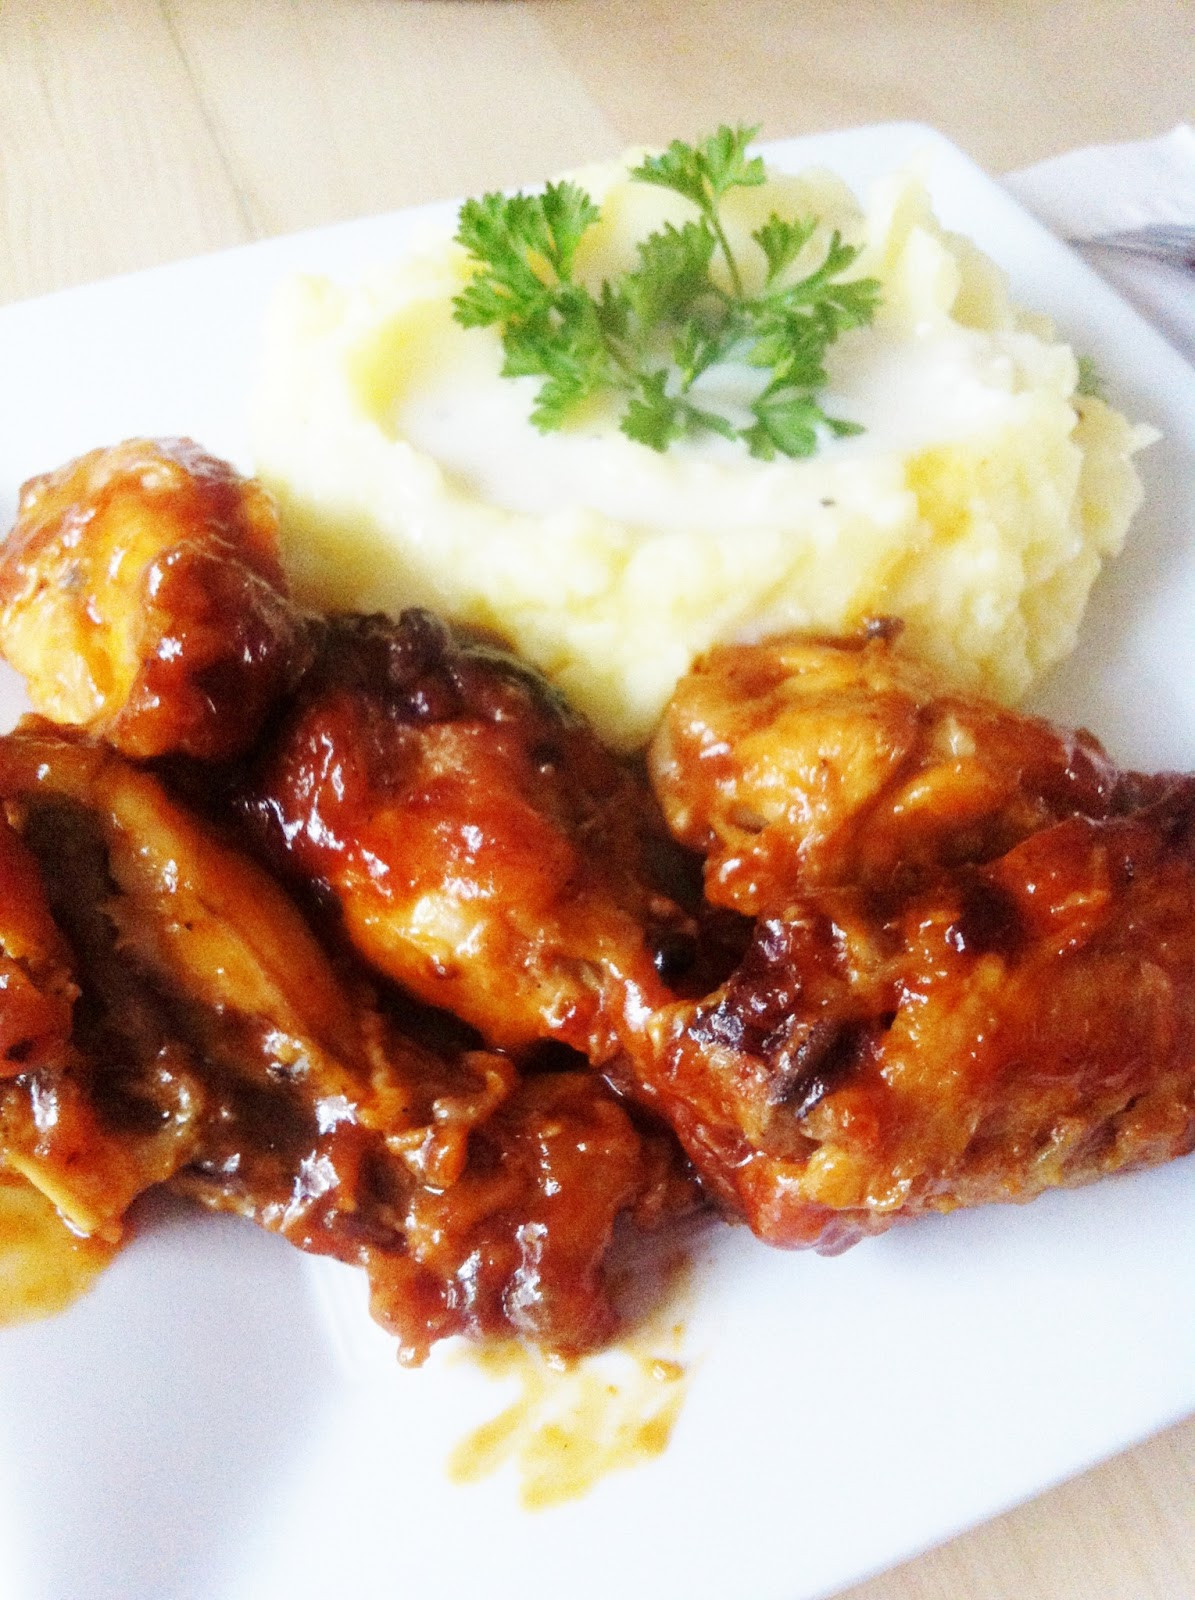 Bbq Chicken Legs In Crock Pot Awesome Momsadventure Delicious Crock Pot Barbecue Chicken Legs